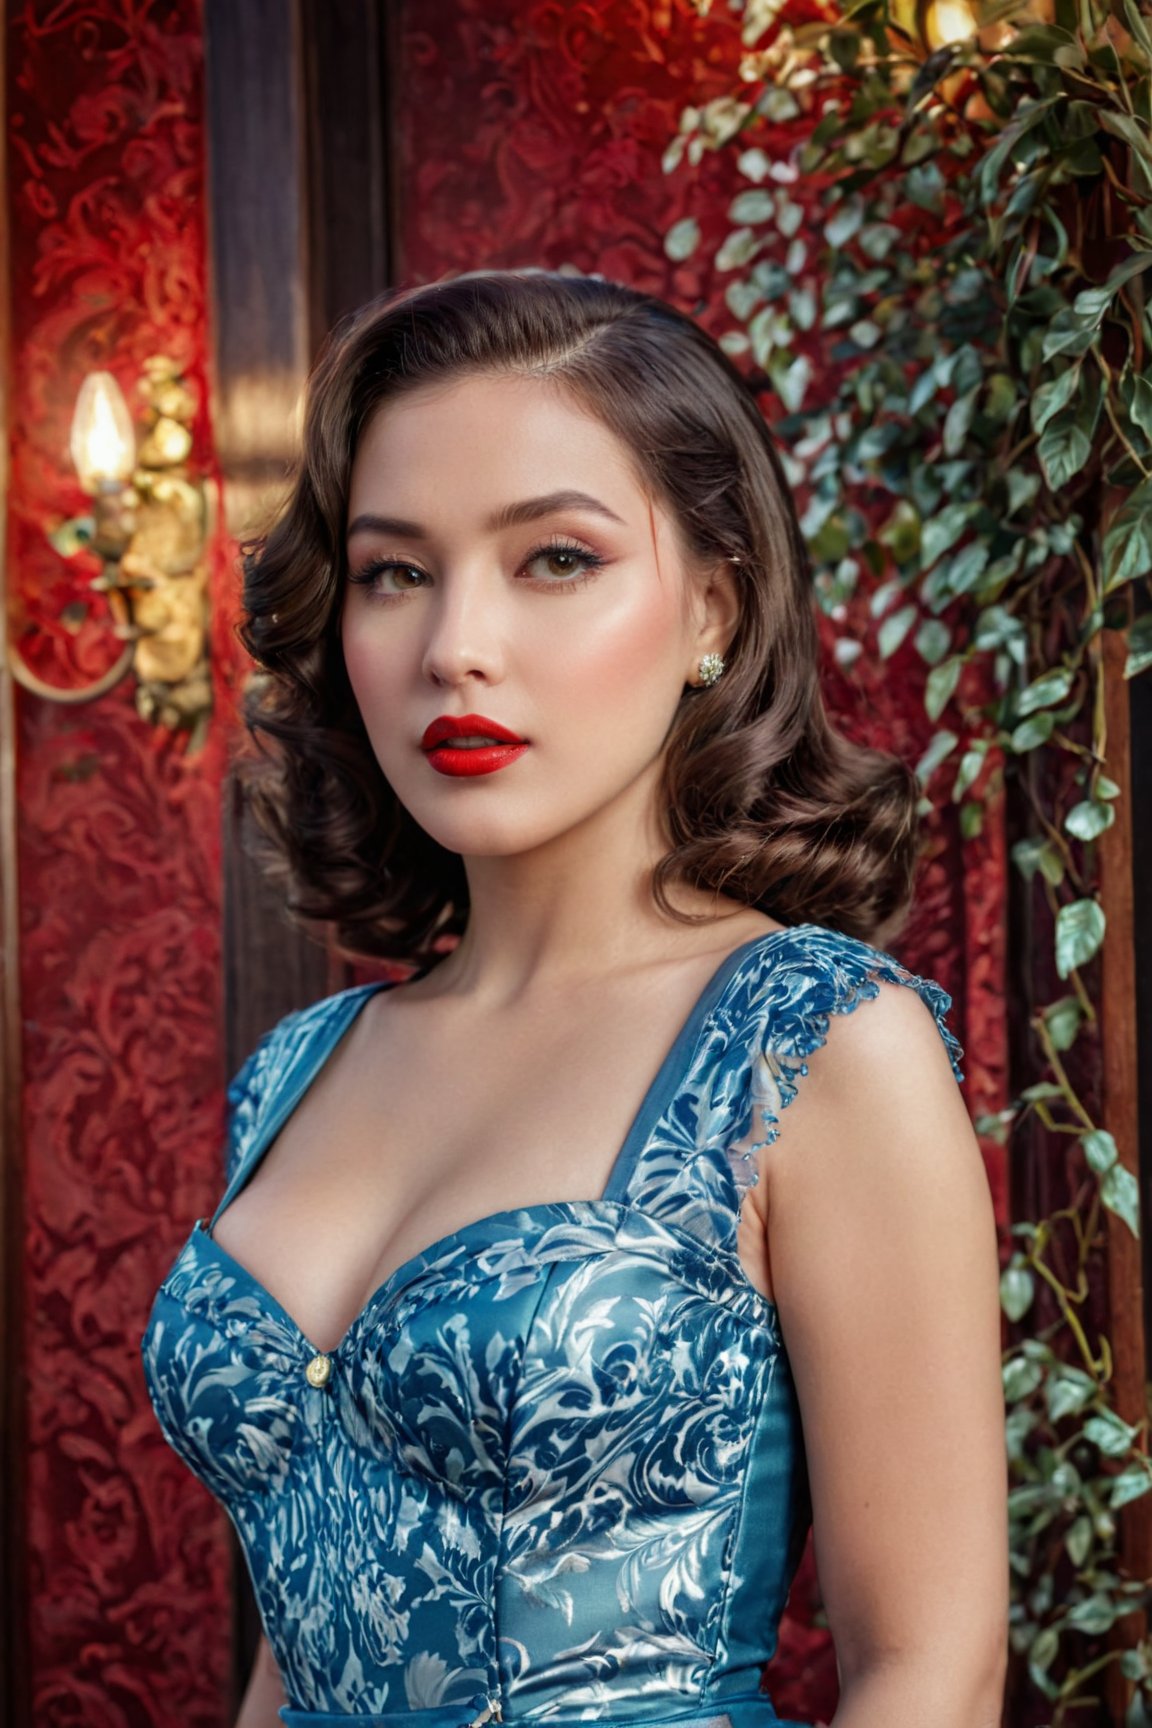 best quality,  4k,  8k,  highres,  masterpiece:1.2),  ultra-detailed,  (realistic,  photorealistic,  photo-realistic:1.37),  hot,  sexy,  woman,  Retro clothing,  Retro style,  cinematic,  photorealistic lighting,  vibrant colors,  seductive atmosphere,  romantic setting,  intense gaze,  classic red lips,  alluring expression,  glamorous accessories,  vintage aesthetics,  retro-inspired poses,  sensual charm,  cinematic composition,  nostalgic environment,<lora:EMS-74104-EMS:0.800000>